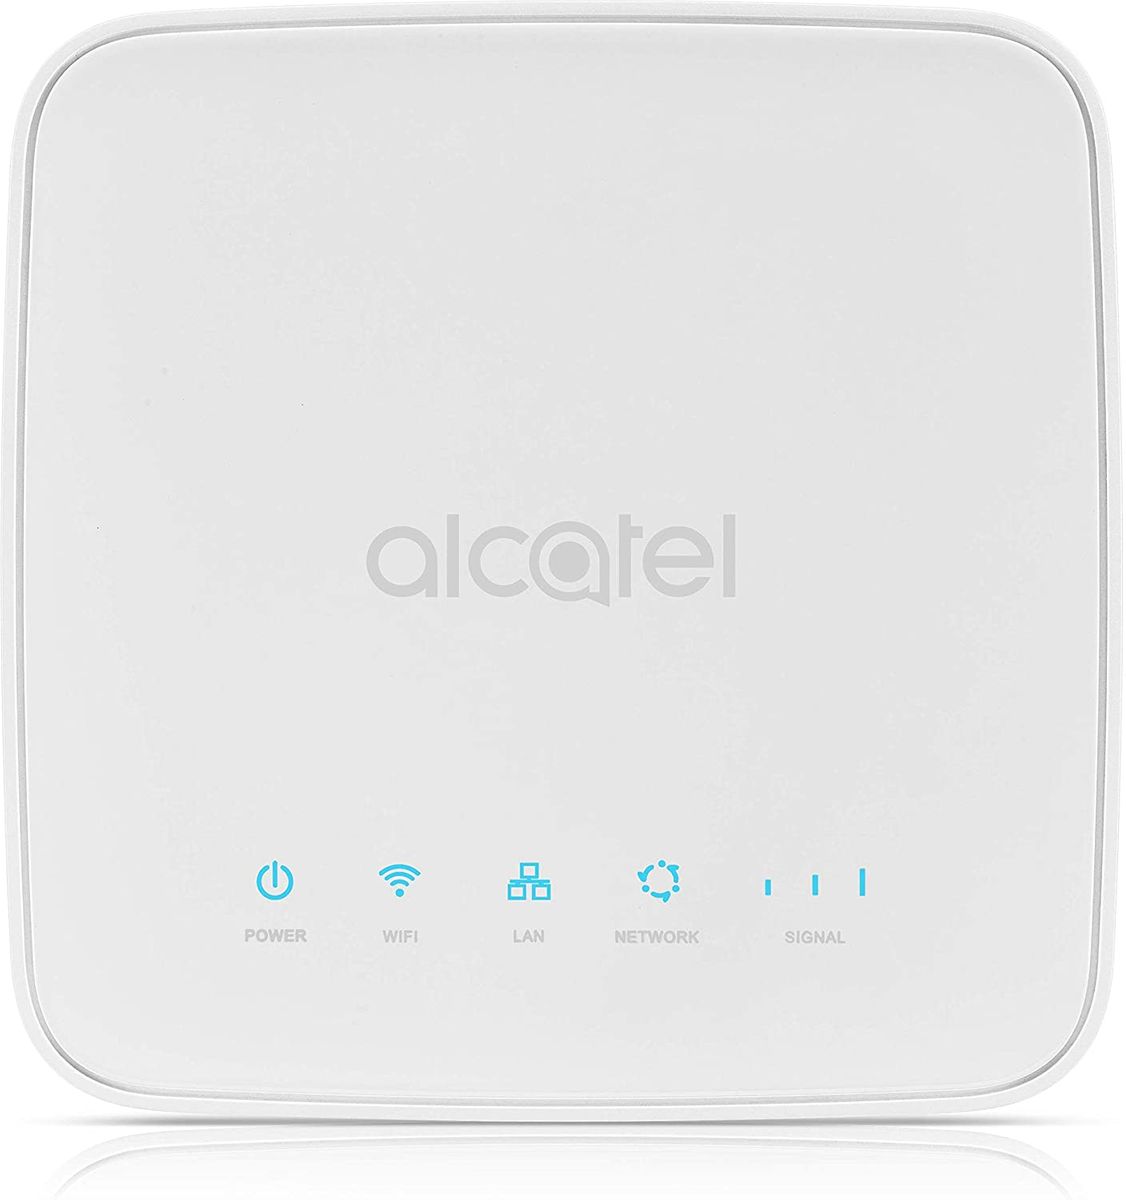 Alcatel HH40 4G/LTE Router CAT4 150Mbps Download 50Mbps Upload Includes 2 External LTE Antennas Wi-Fi 802.11b/g/n Hotspot Function WPS 2 x 100Mbps LAN Port -